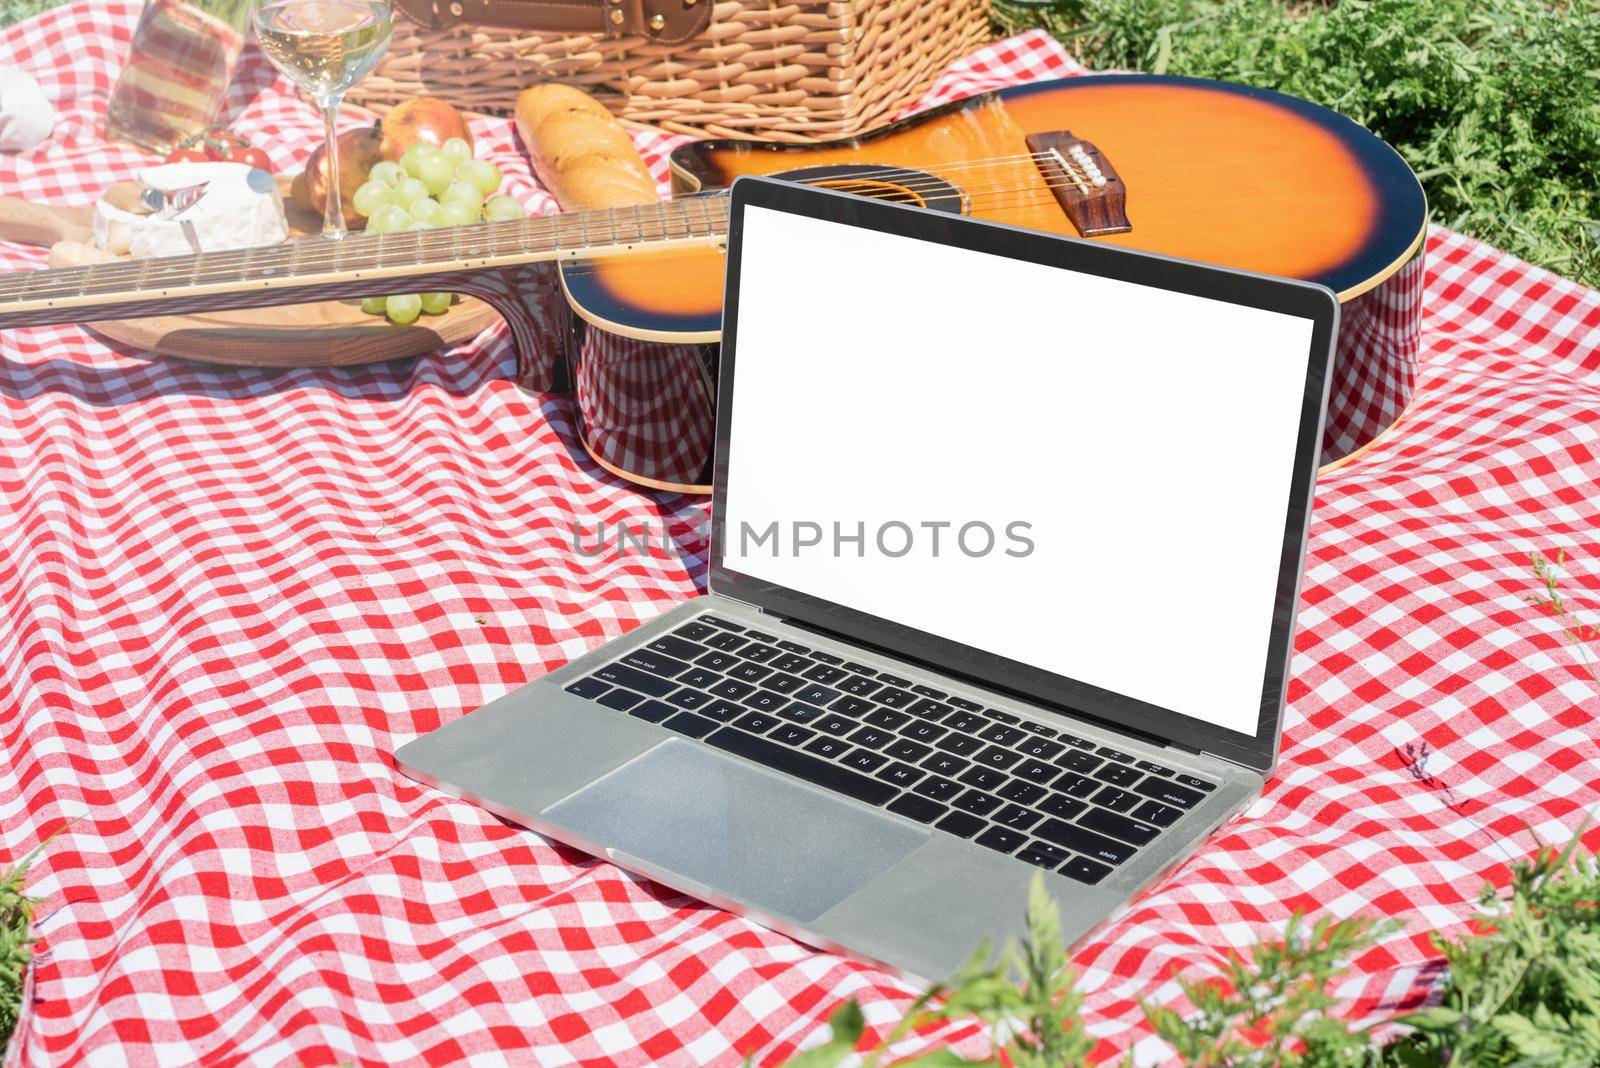 closeup of picnic place andlaptop with blank screen for mockup. summer leisure and fun, freelance working